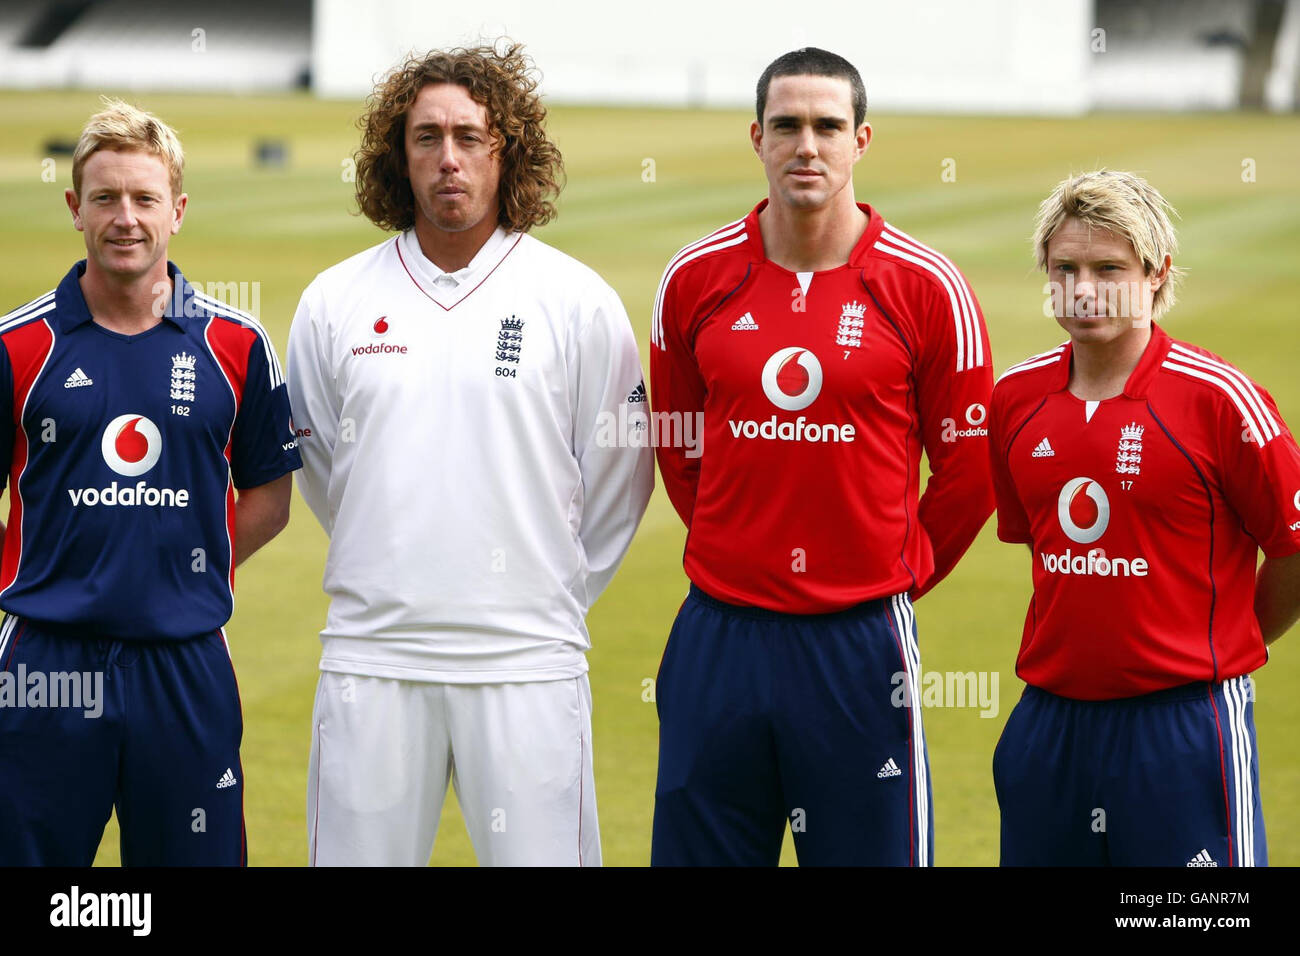 england cricket red jersey